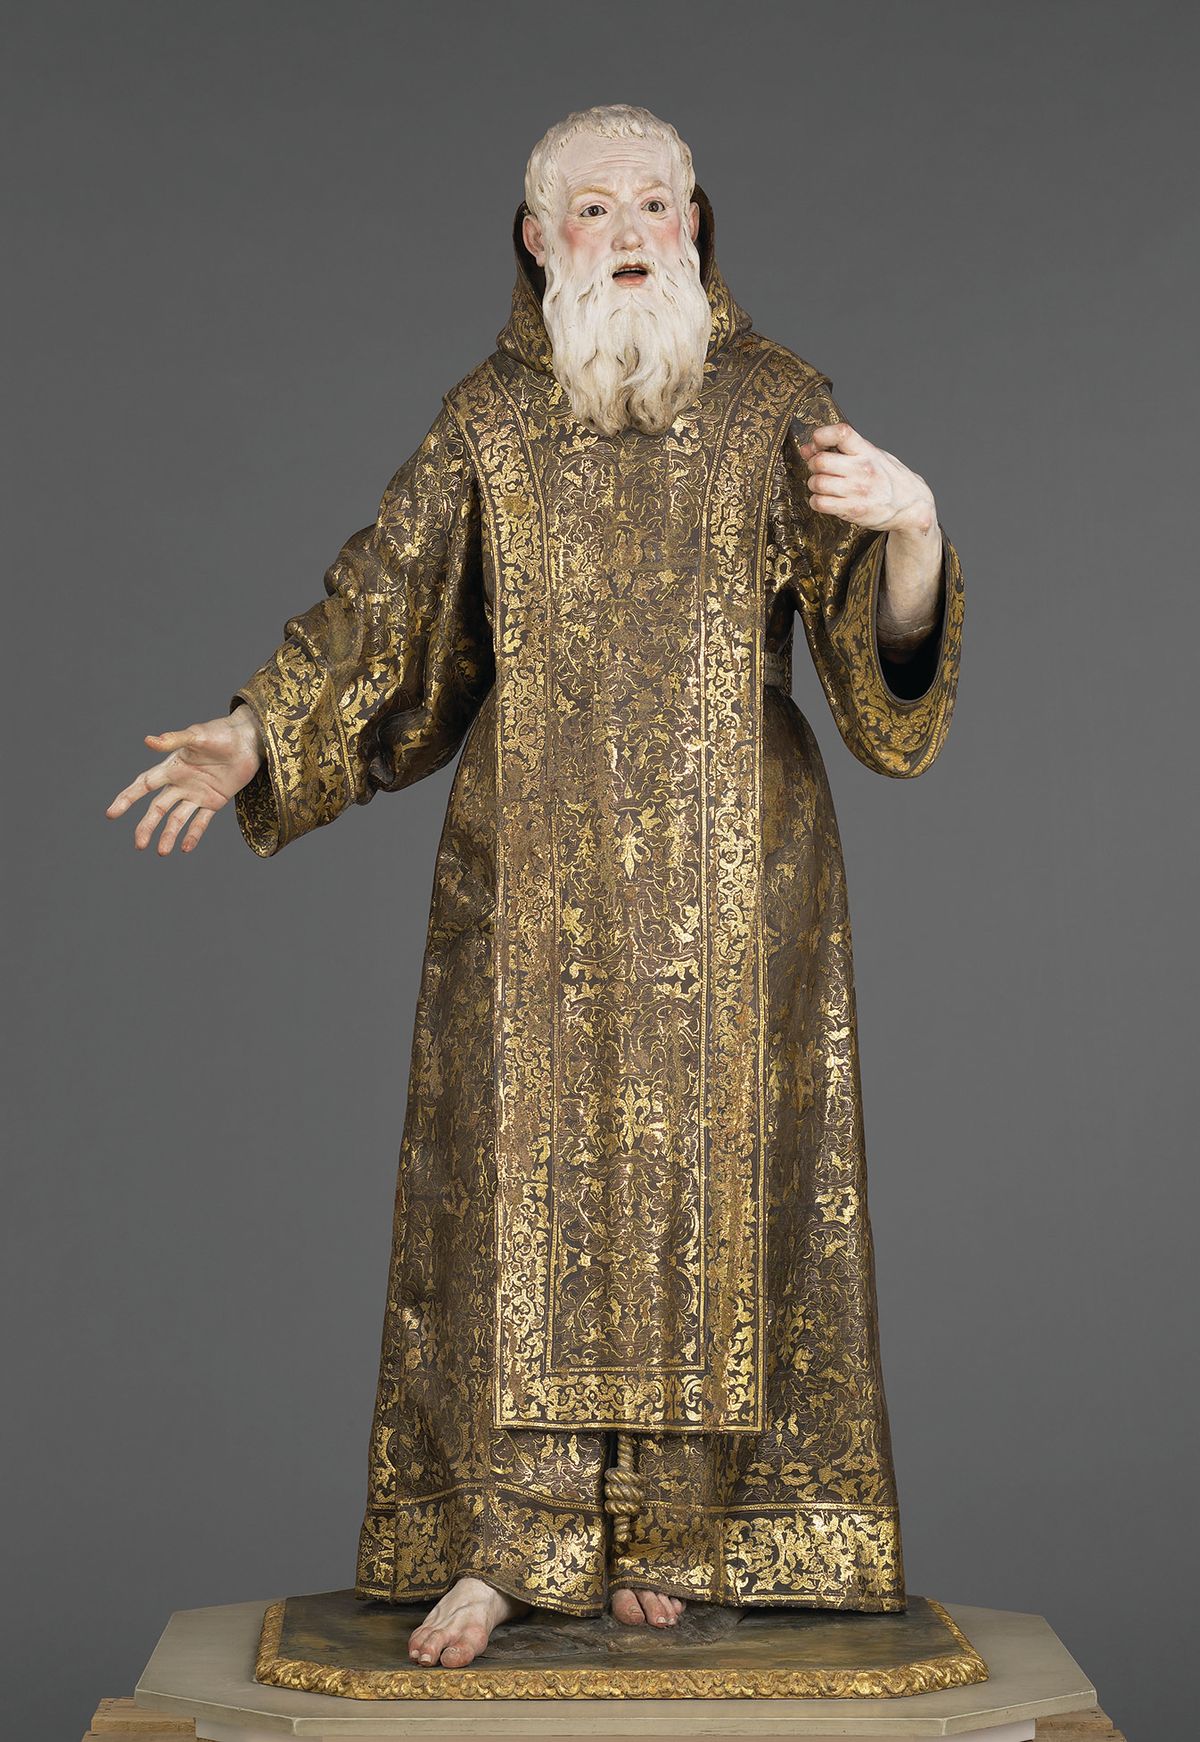 Roldán’s figures are characterised by their expressive faces. Saint Ginés de la Jara (around 1692) is in the J. Paul Getty Museum in Los Angeles Courtesy J. Paul Getty Museum